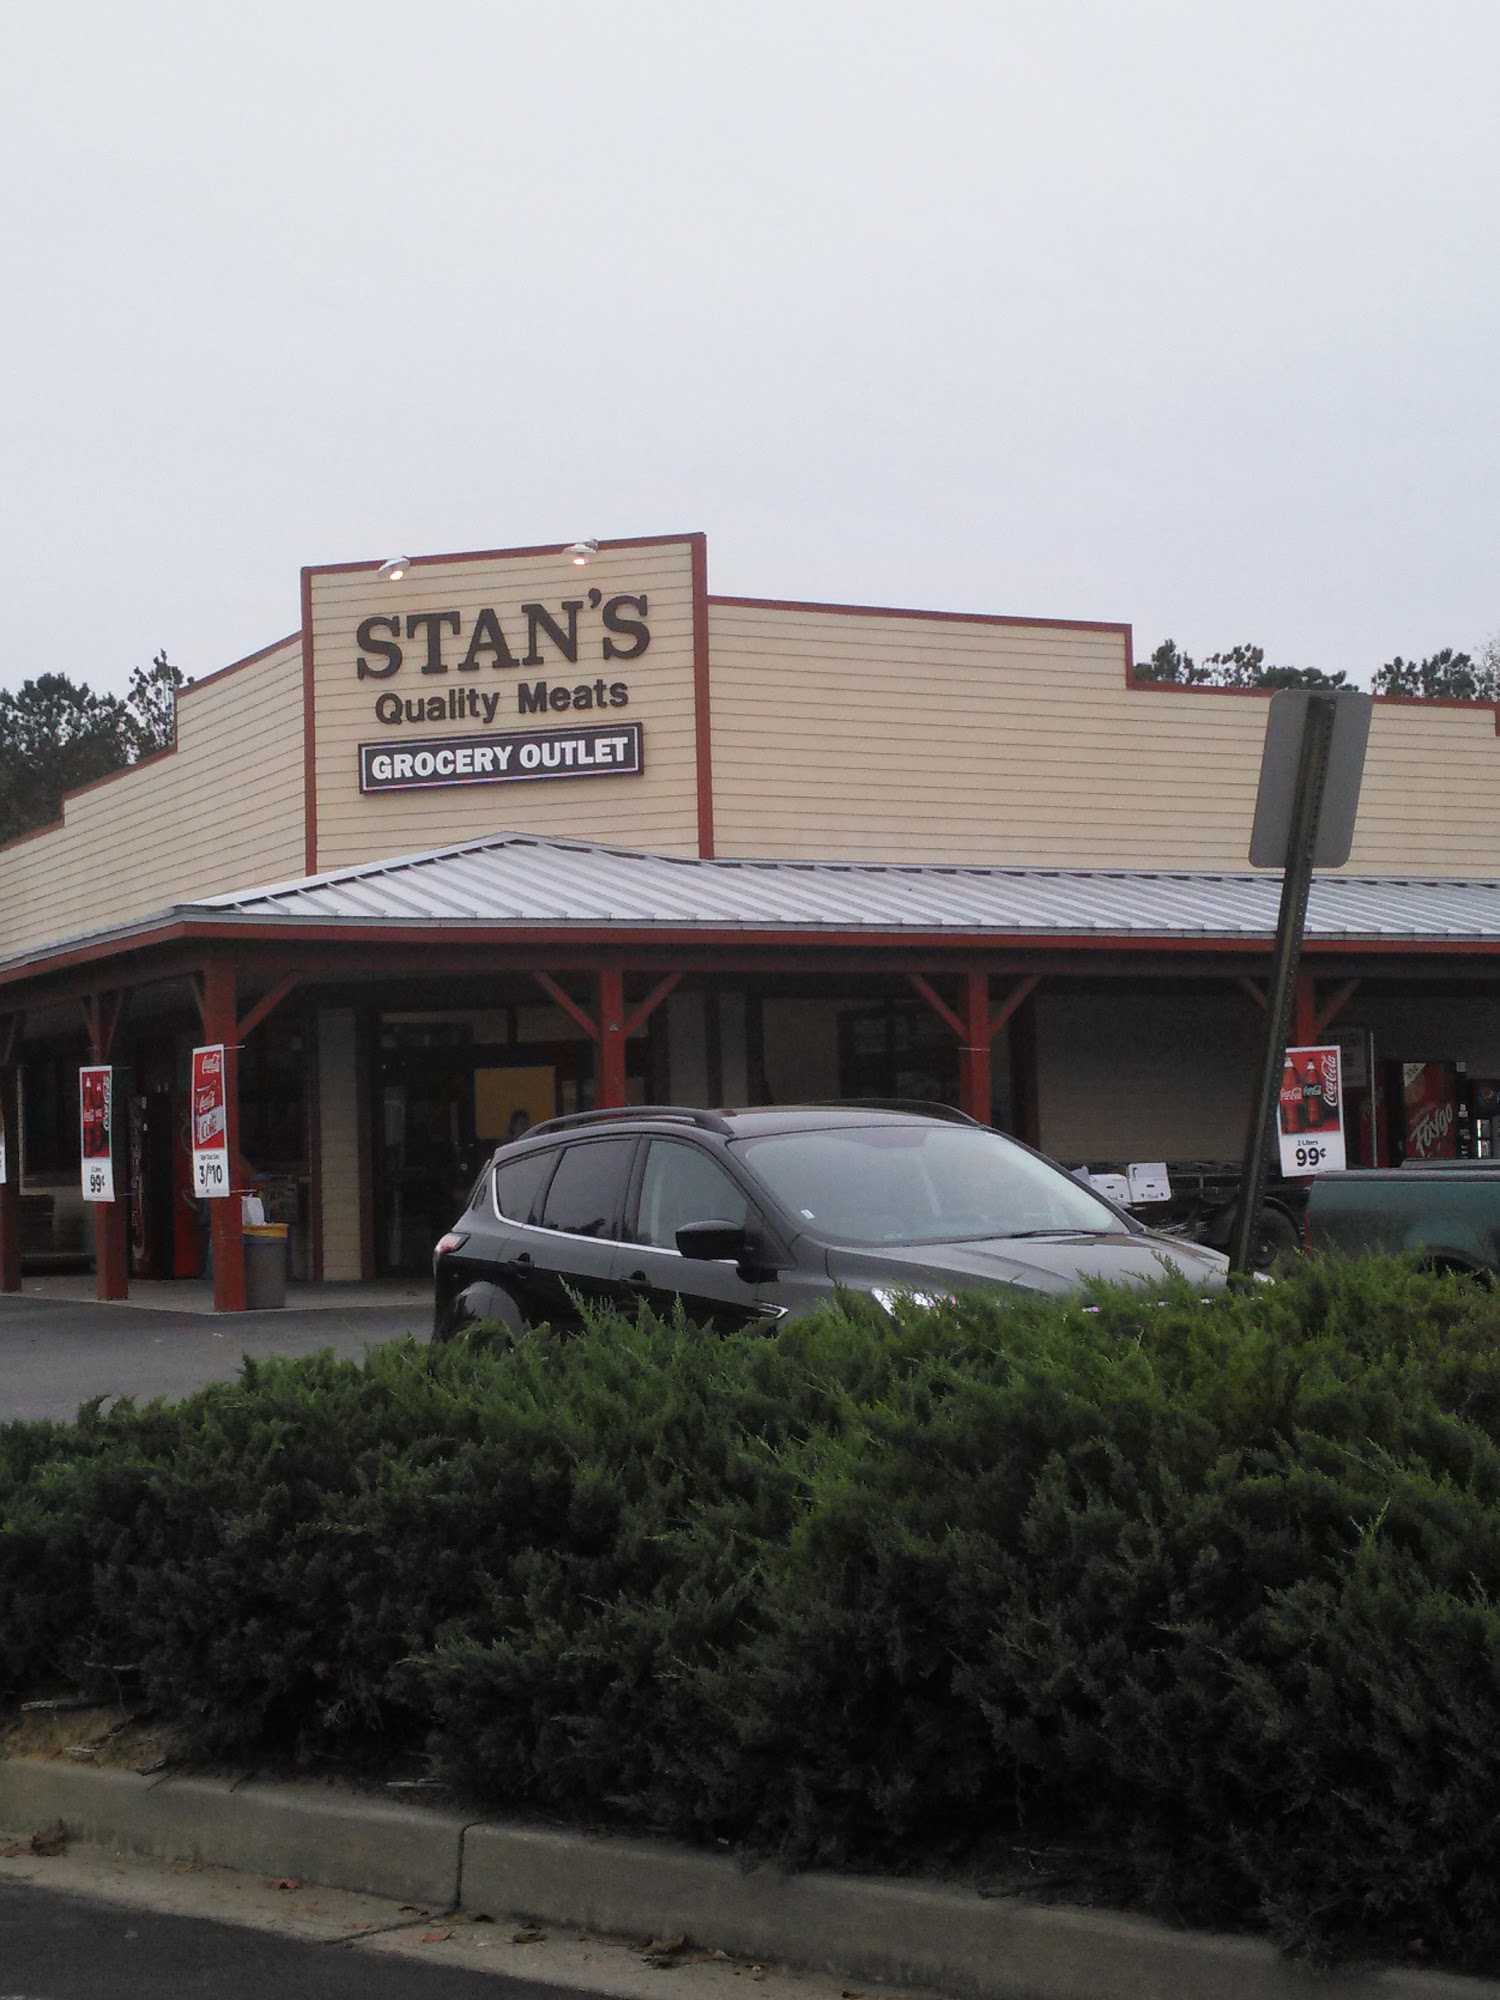 Stan's Quality Meats